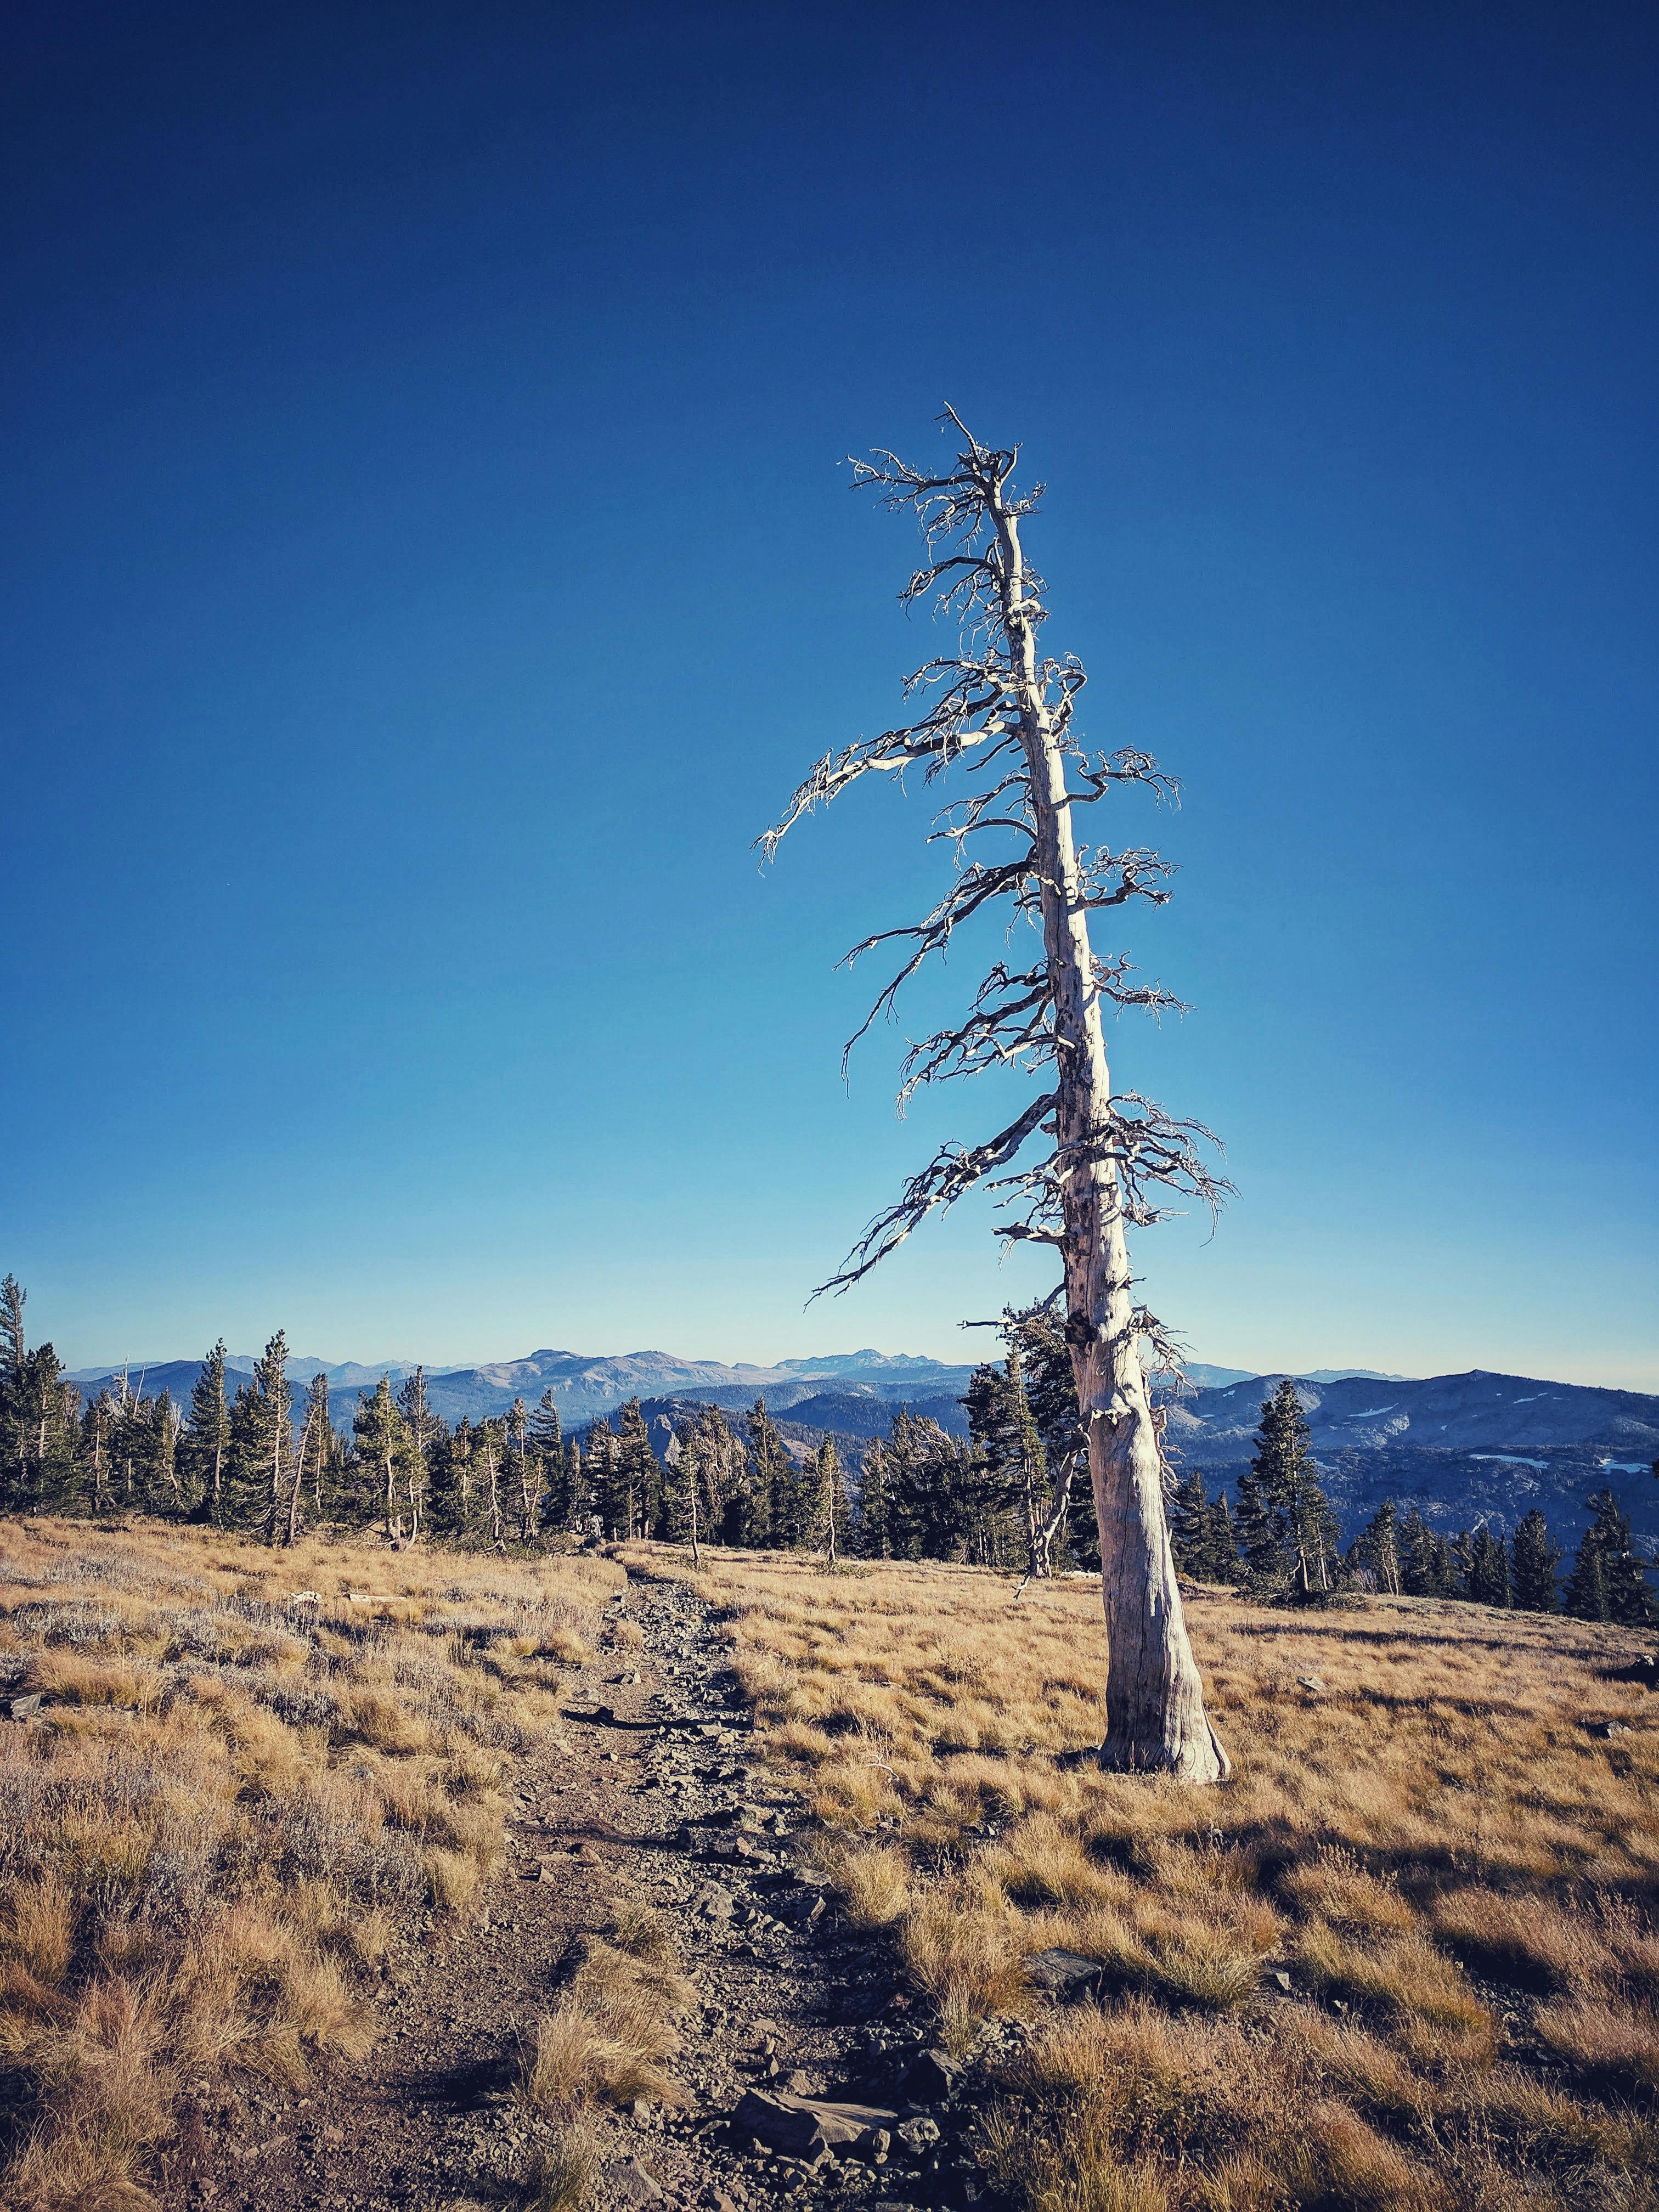 A bleached, dead pine tree along a trail in California